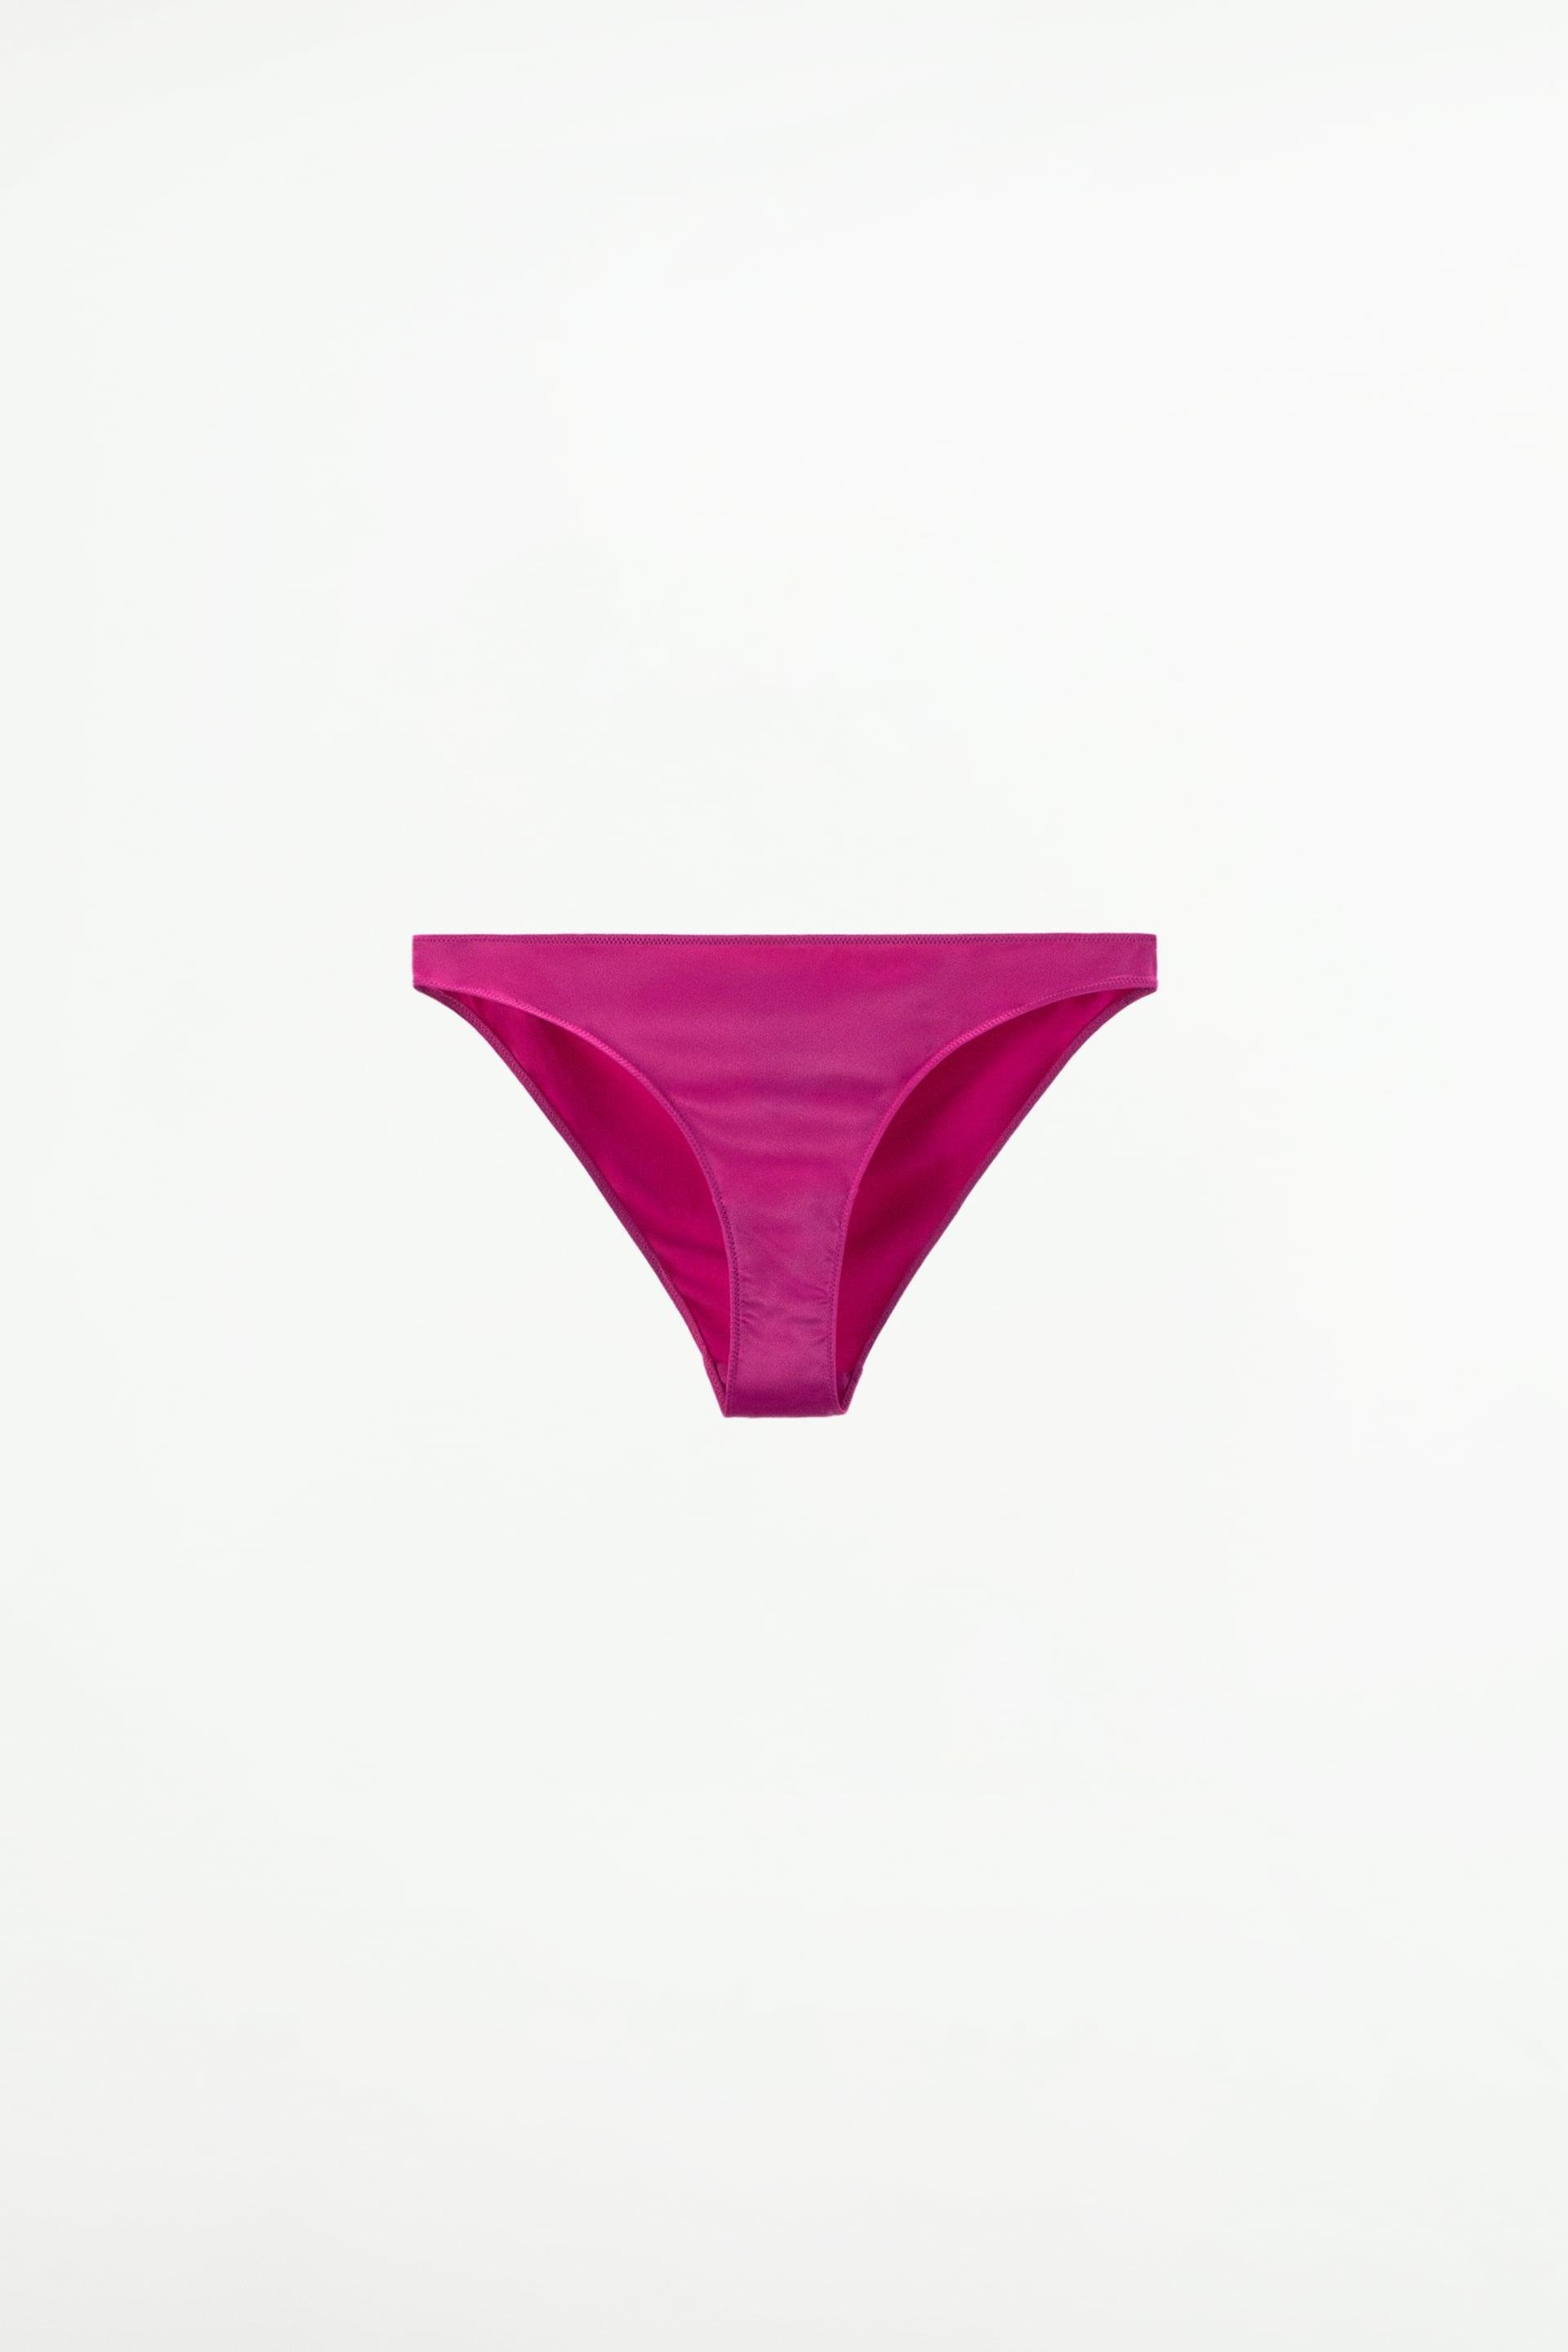 SATIN EFFECT PANTIES LIMITED EDITION by ZARA